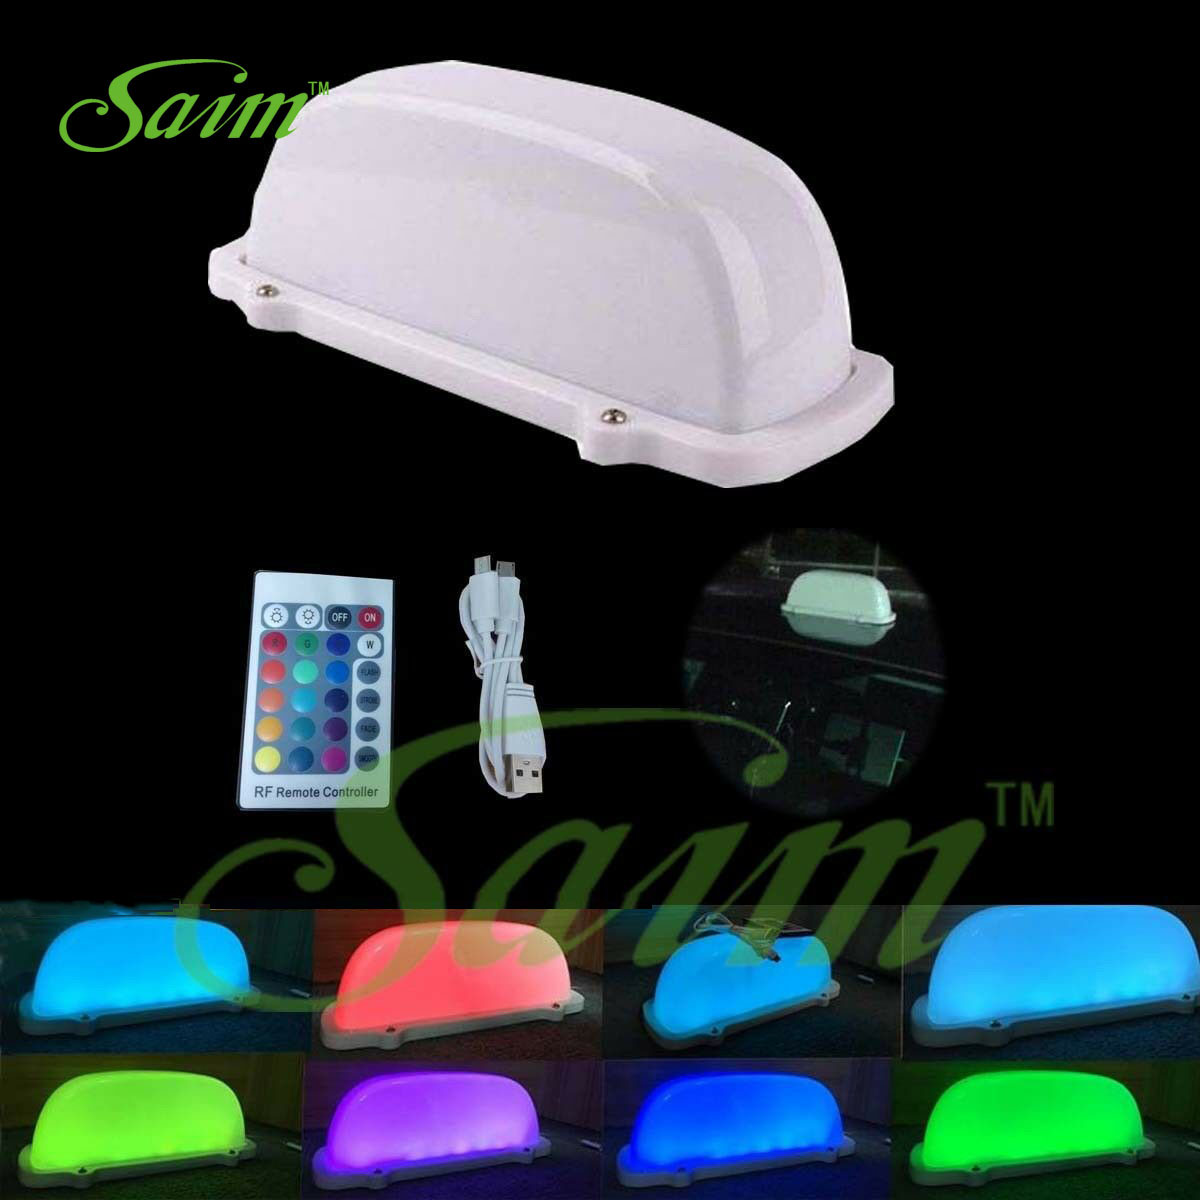 DIY Driver Sign Car Led Bright Light Top TAXI Waterproof Lamp White LED DC 3.7V Rechargeable Battery for TAXI Drivers